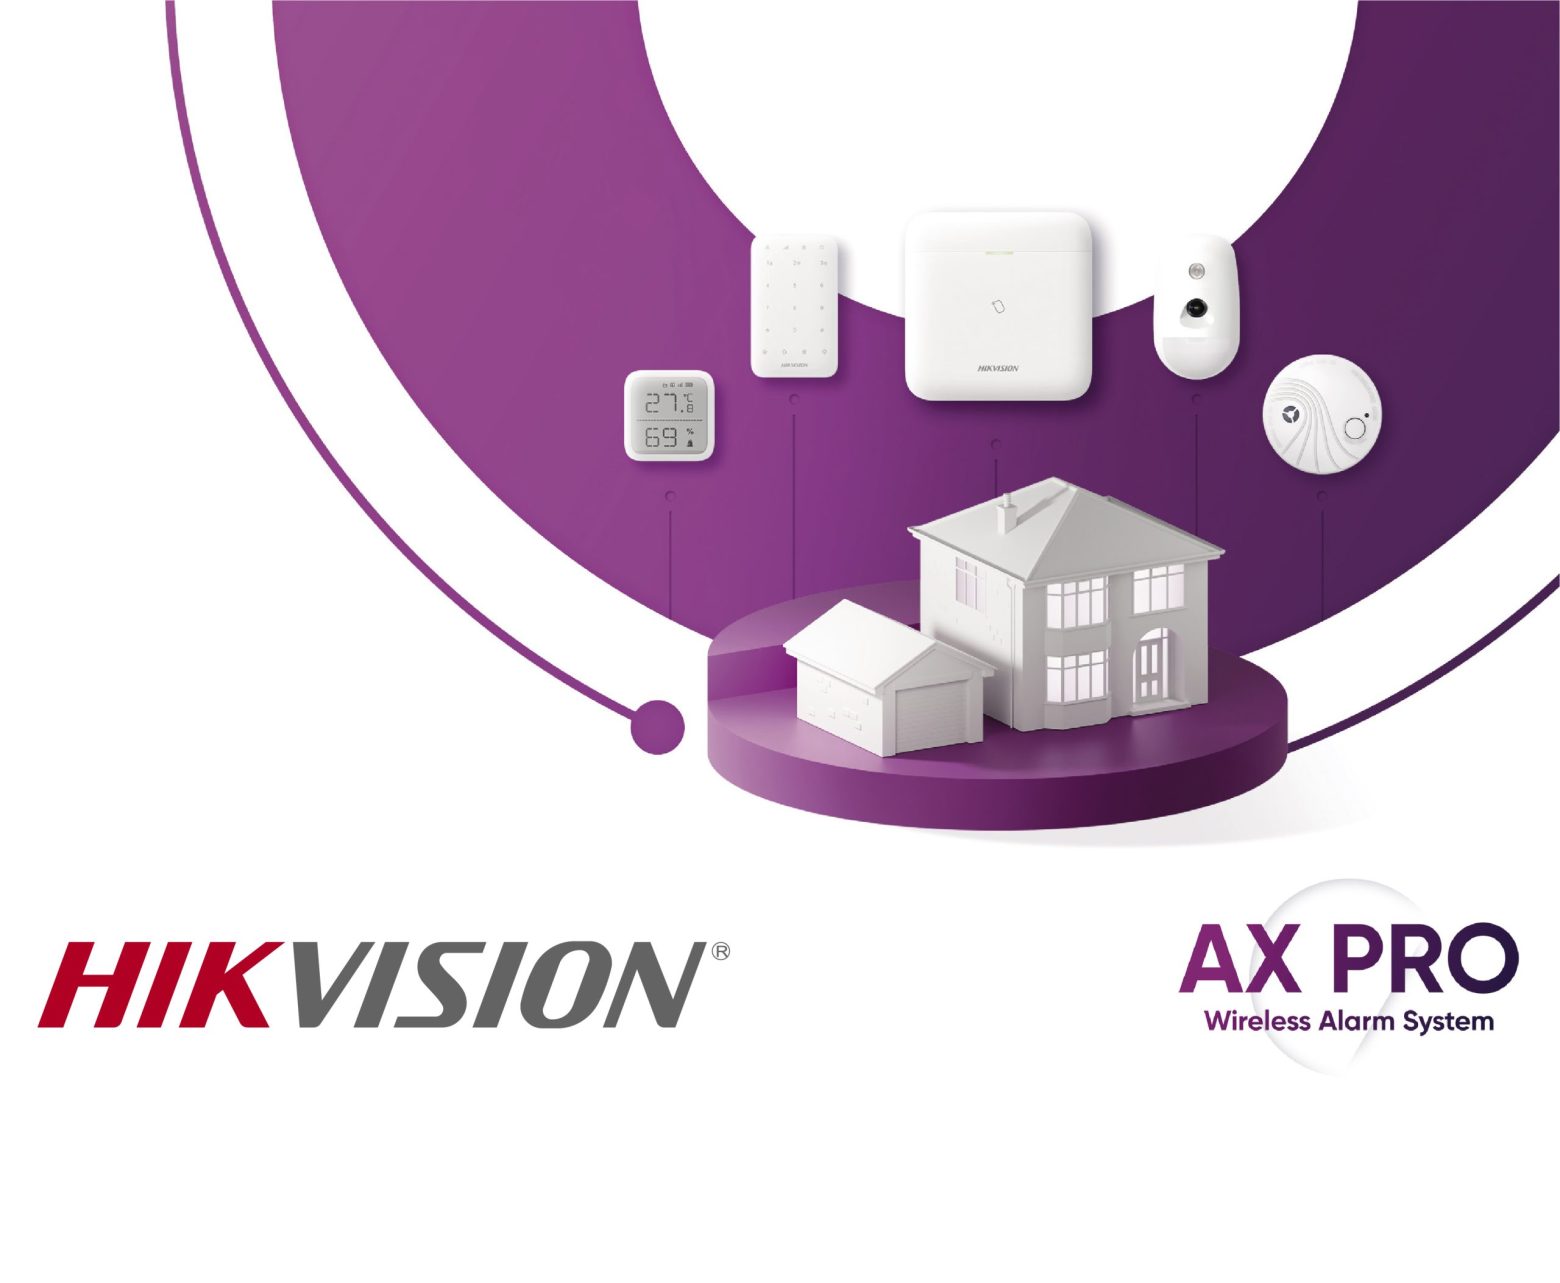 MJ Flood Security installing the Hikvision AX-Pro Wireless Alarm